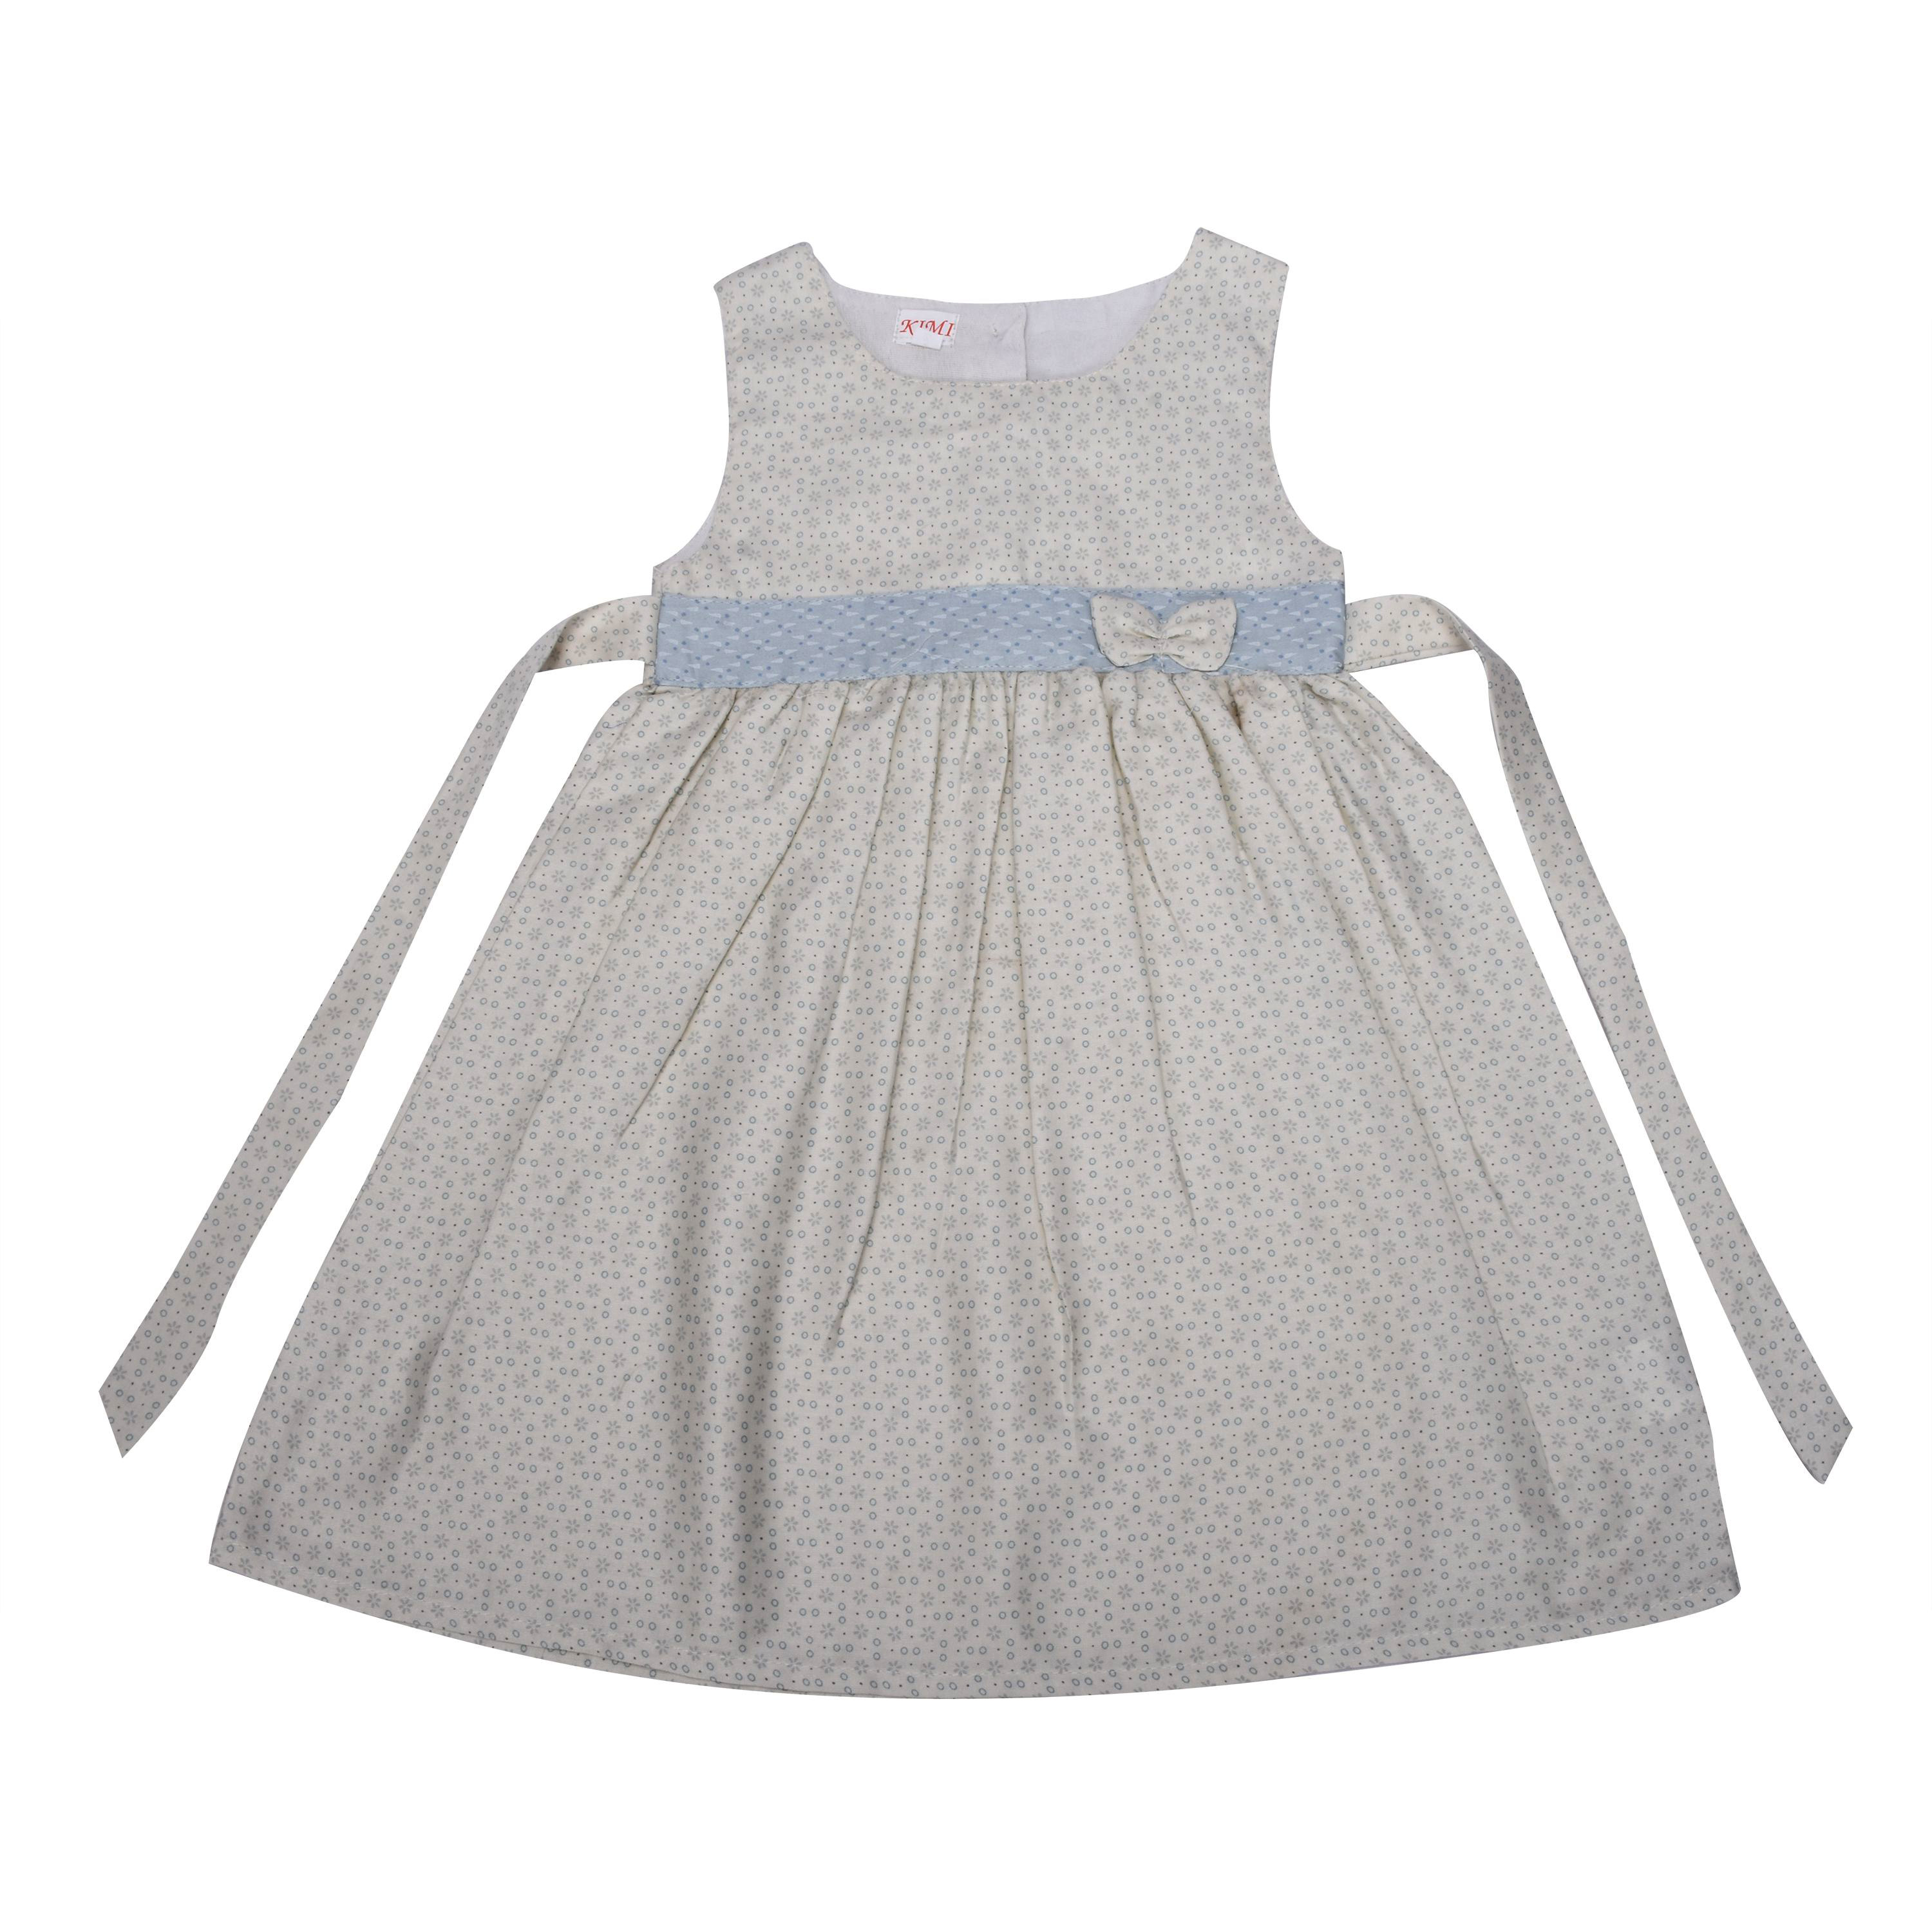 Buy Kimi Girls Knee Length Casual Dress Online @ ₹197 from ShopClues